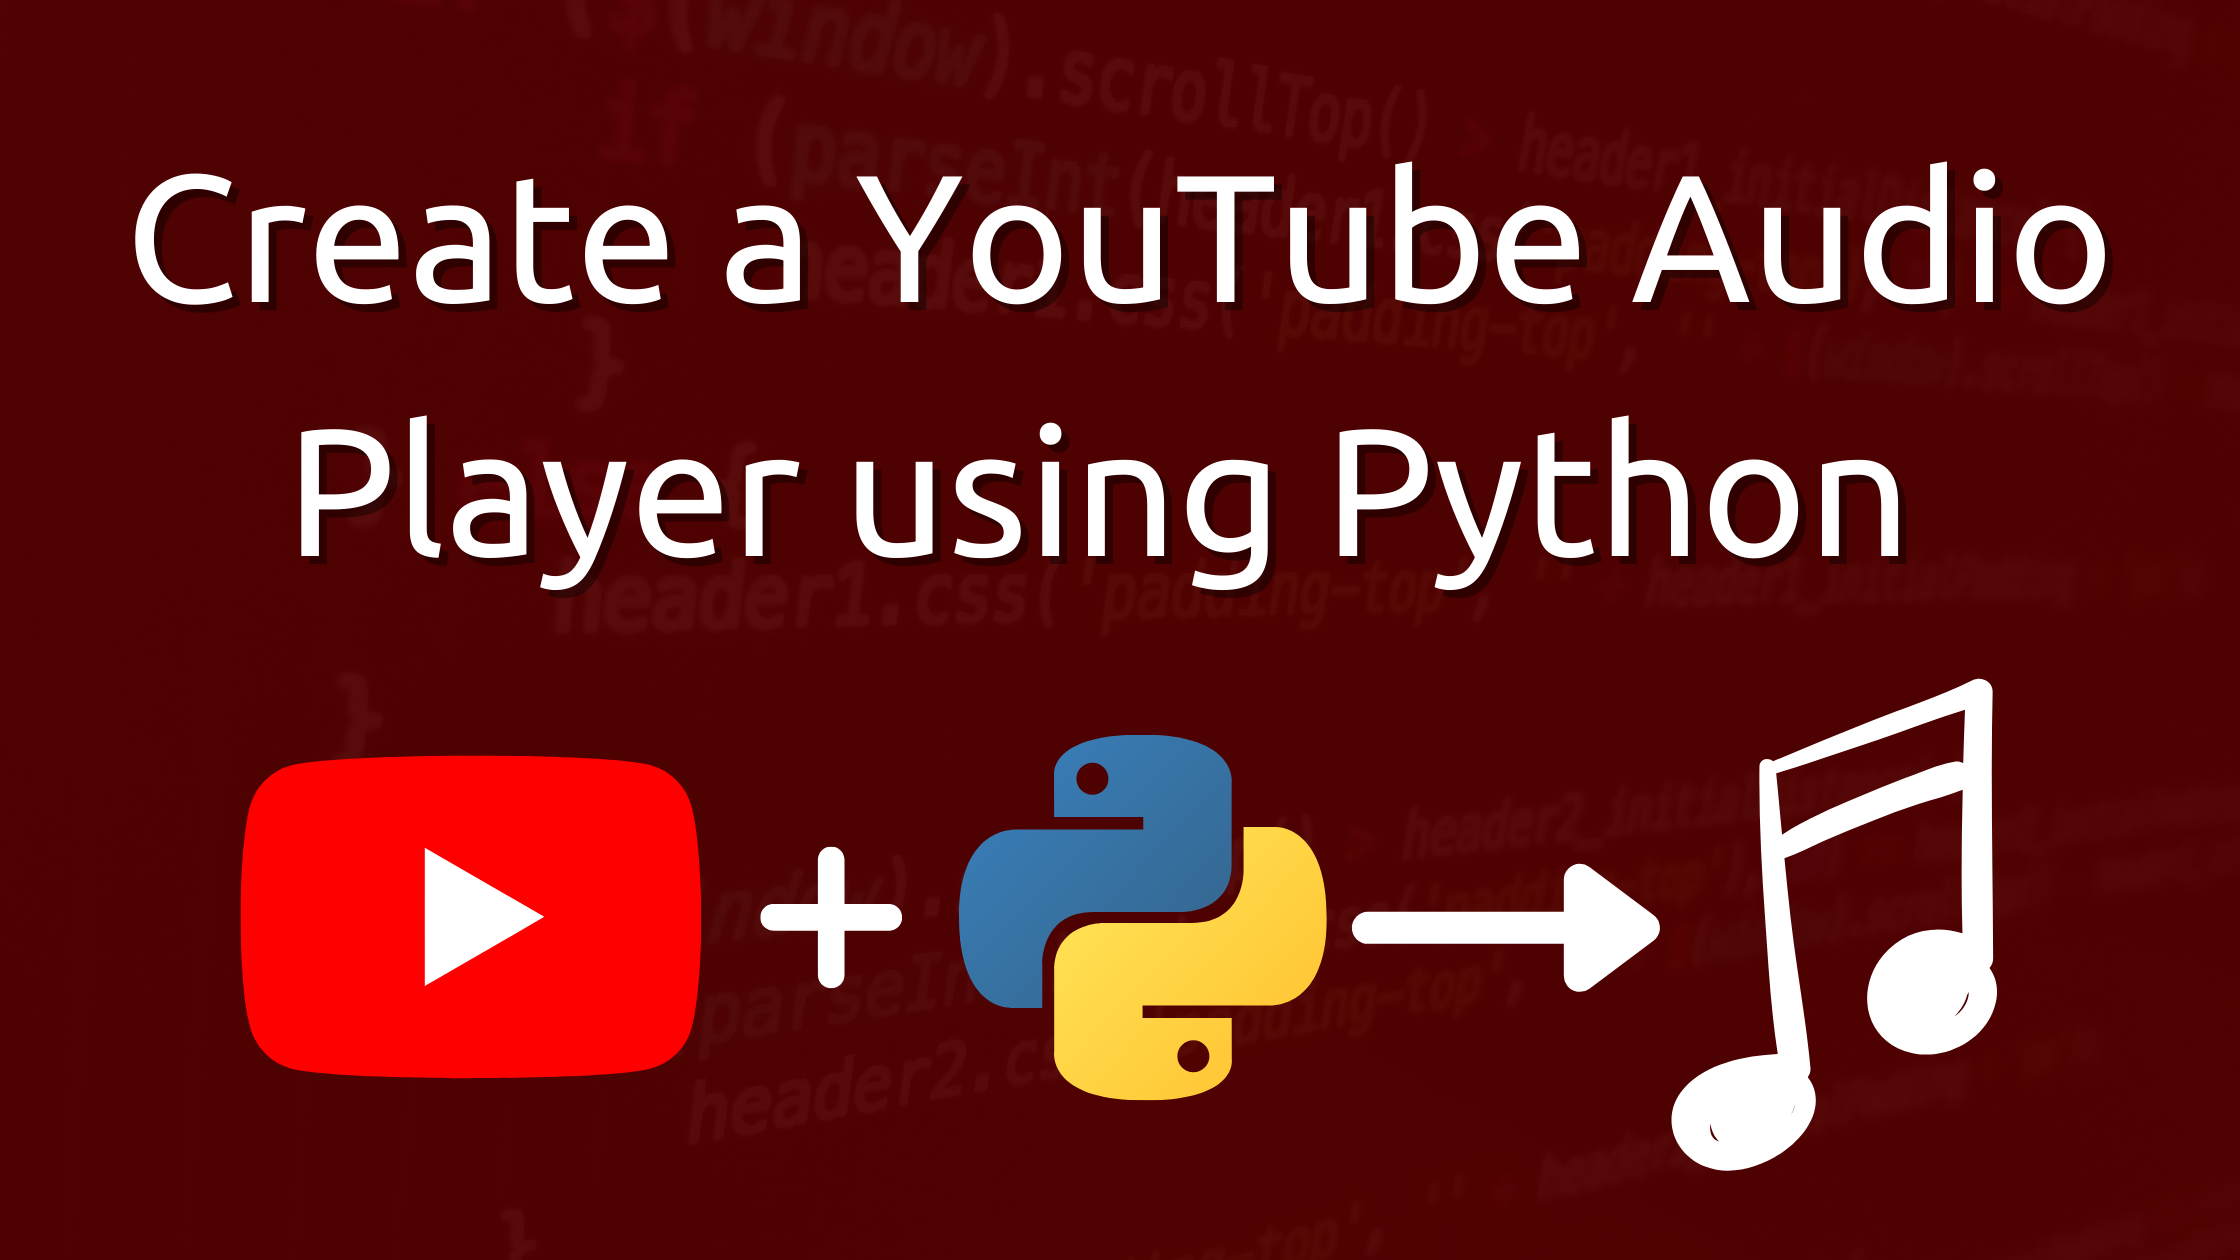 How to create a YouTube audio player using Python?